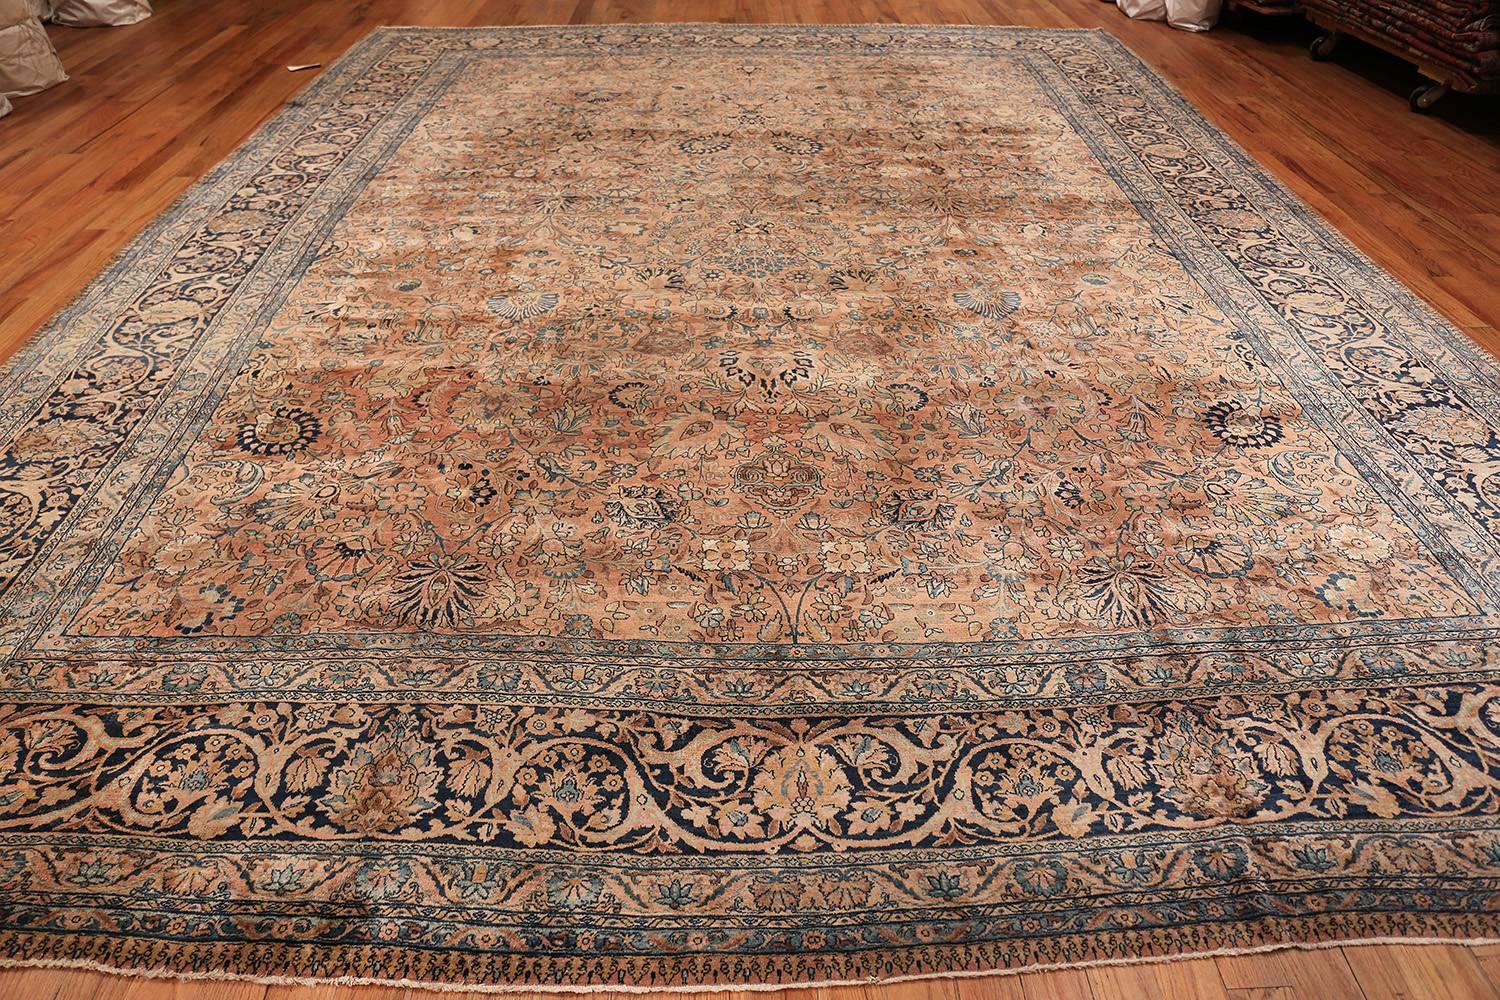 Antique floral Persian Kerman rug, country of origin: Persia, date circa early 20th century. Size: 11 ft 10 in x 15 ft 6 in (3.61 m x 4.72 m). The city and province of Kerman in south central Iran has been at the heart of the rug trade for hundreds